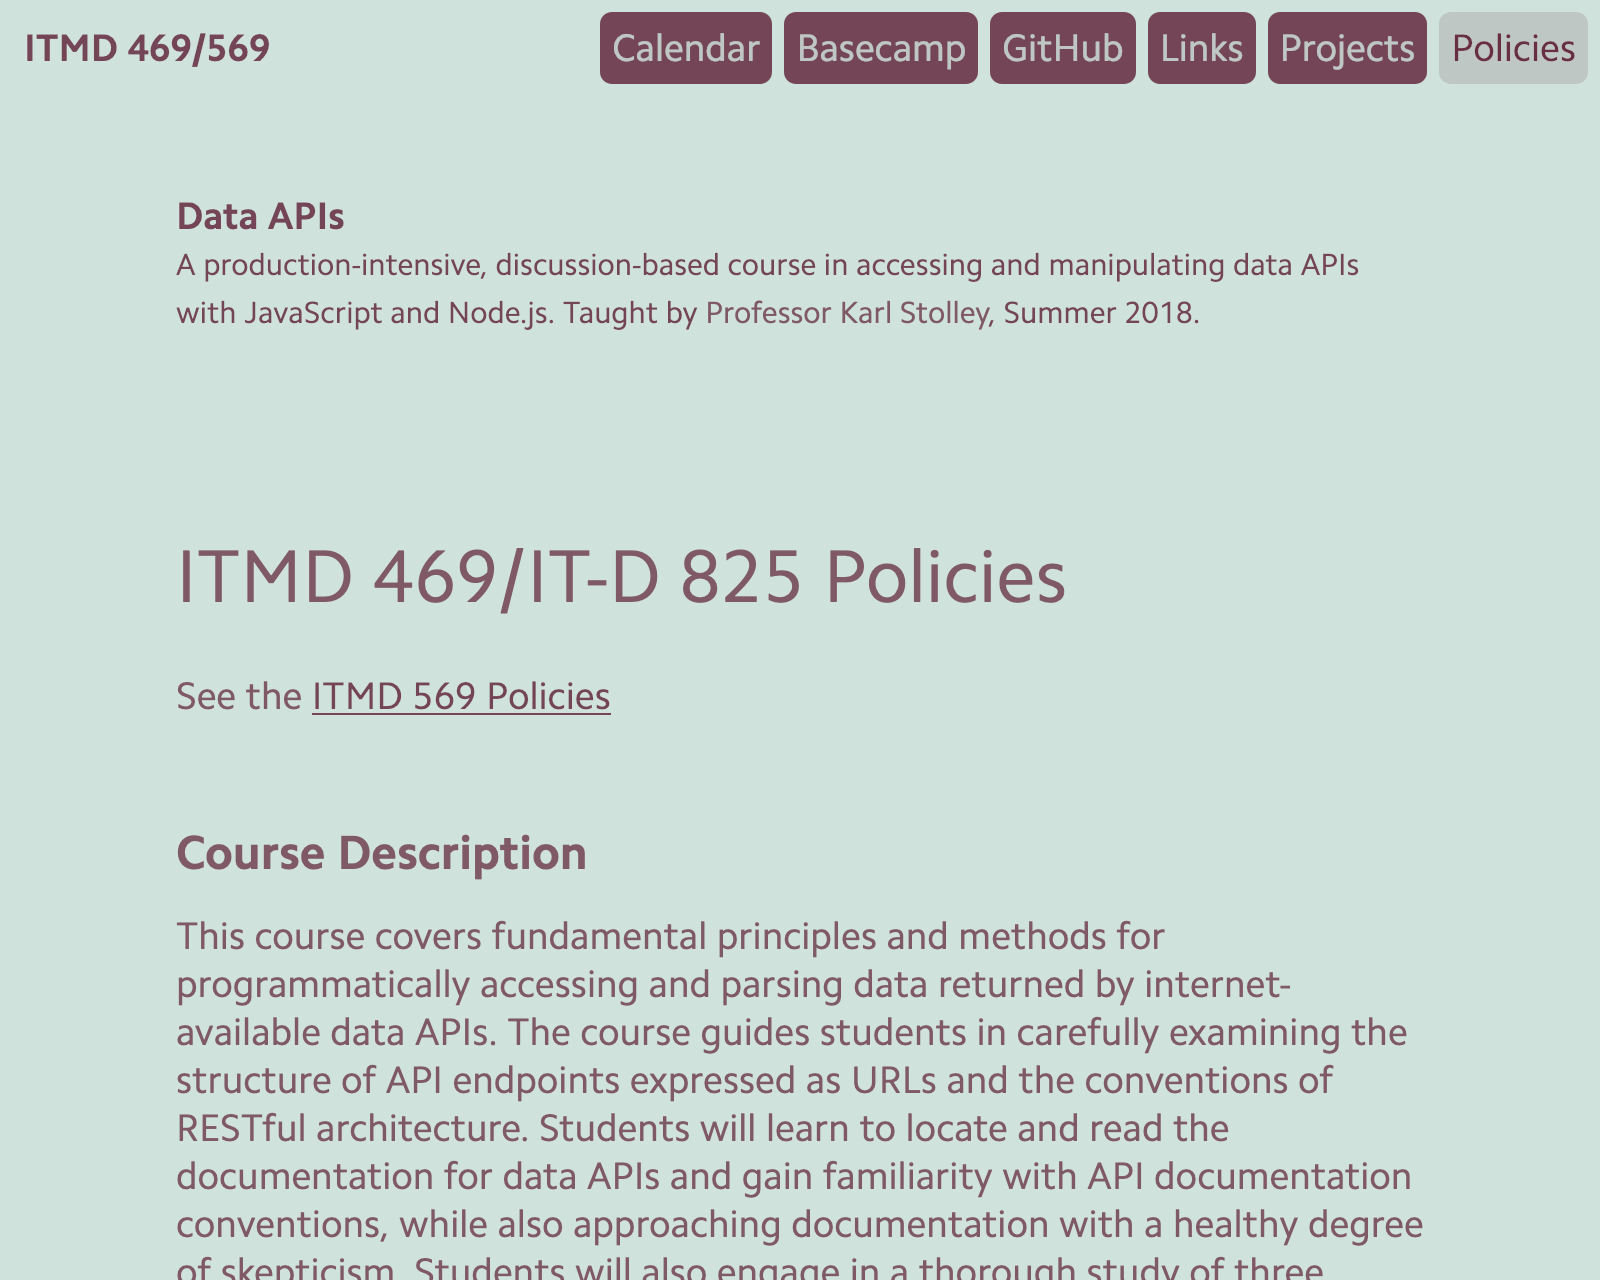 Screenshot of ITMD 469 course site.